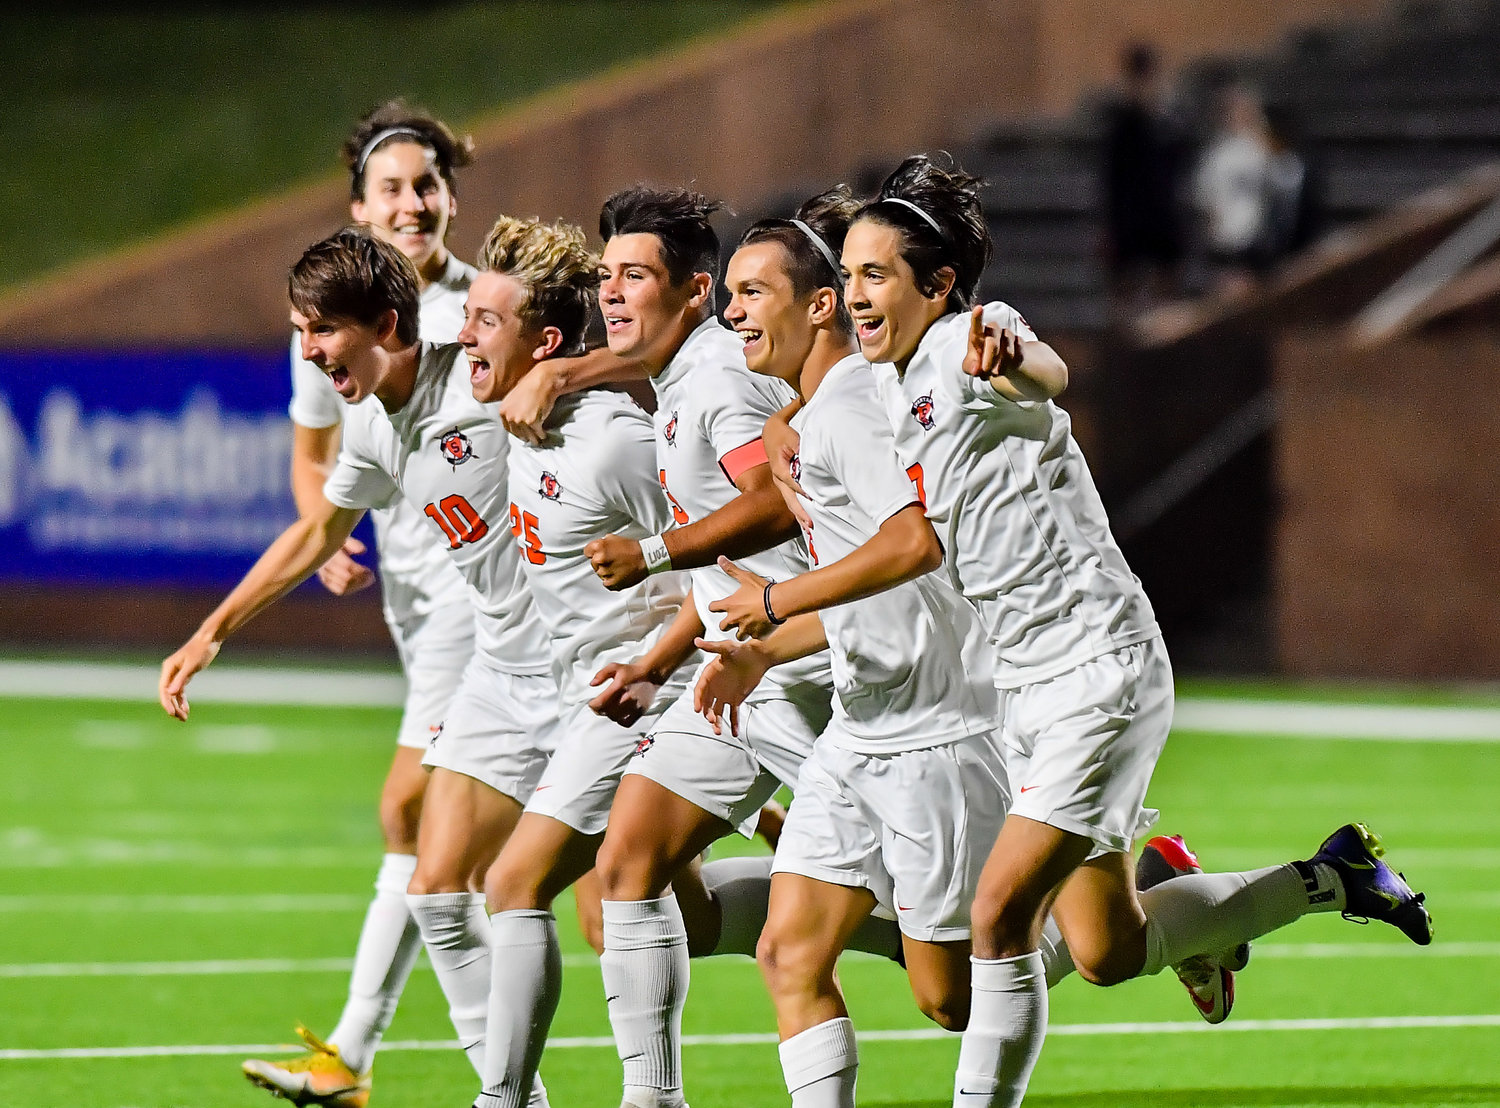 April 1, 2022: Seven Lakes celebrate the win as they advance during Regional Quarterfinal soccer playoff, Seven Lakes vs Katy Taylor at Rhode Stadium. (Photo by Mark Goodman / Katy Times)